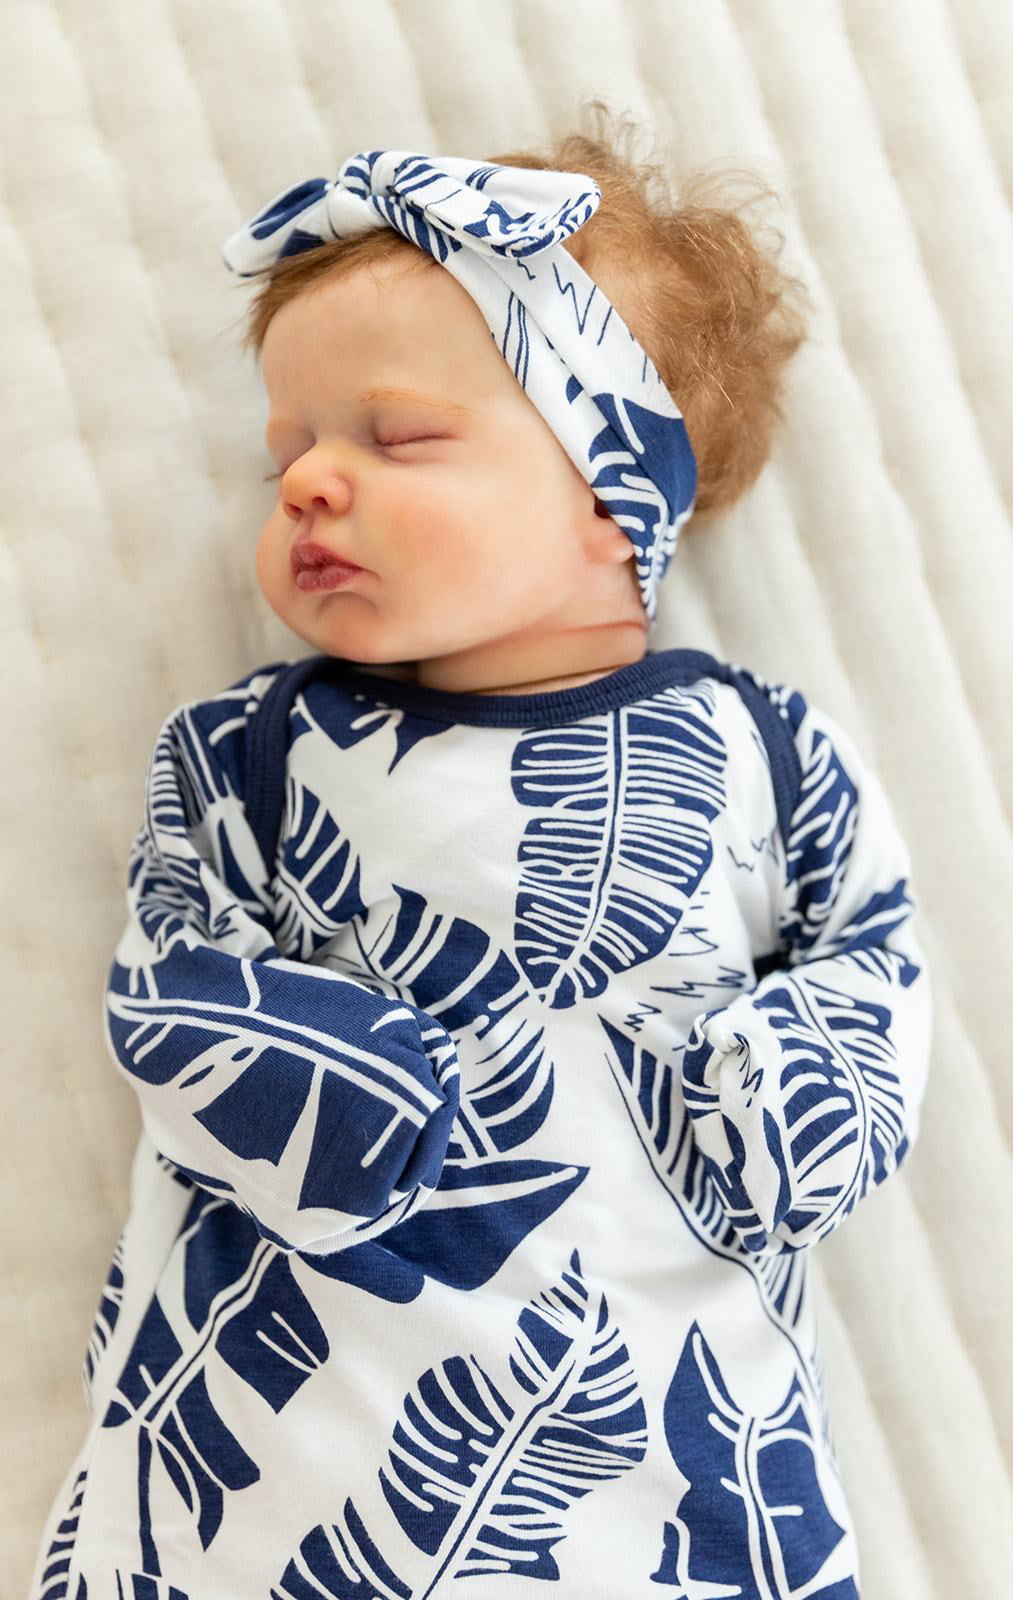 Discover more than 151 newborn gown and hat set